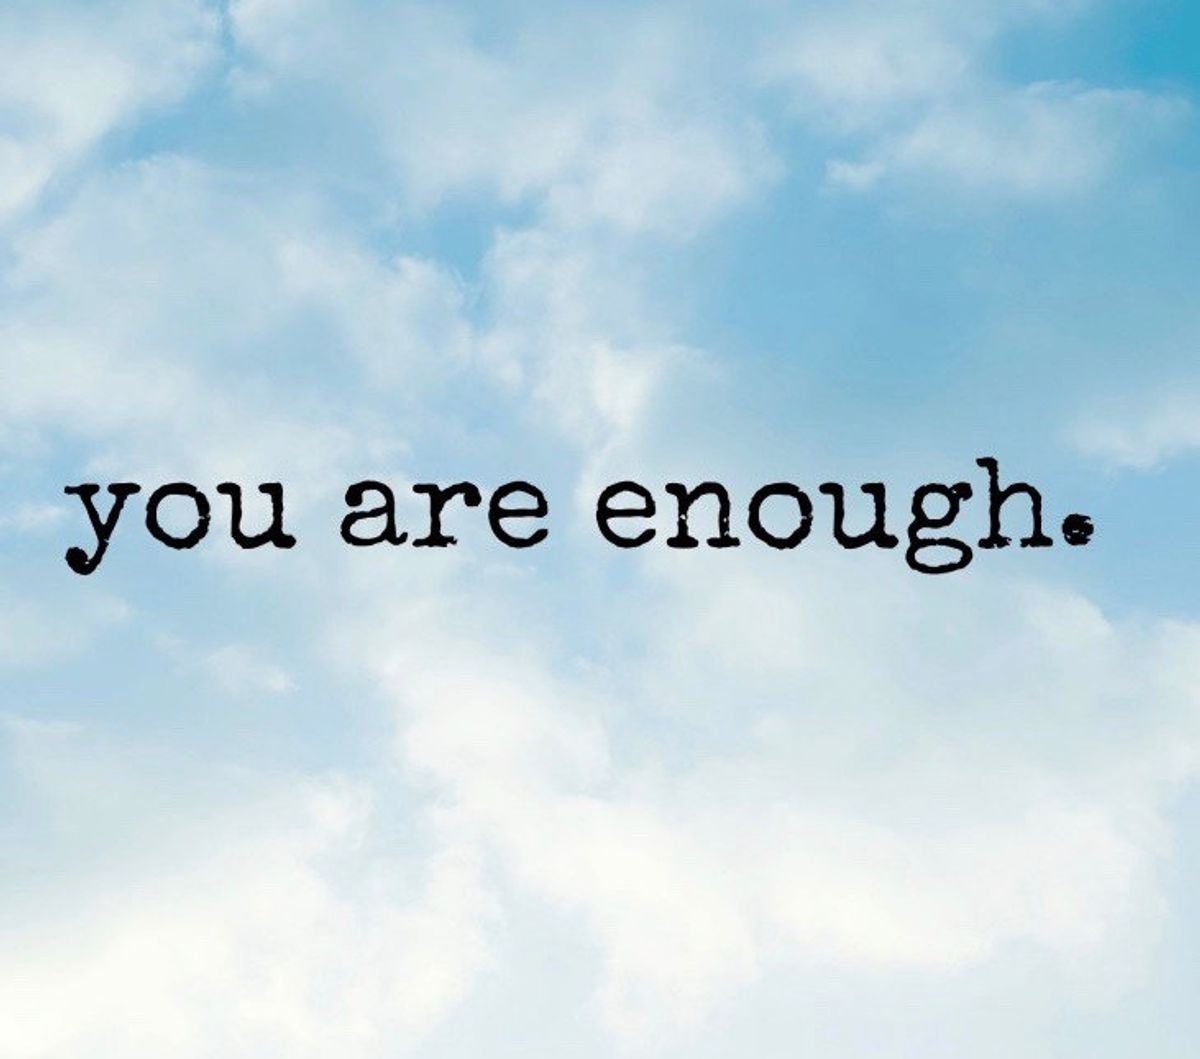 Despite What They Taught You, You Are Enough